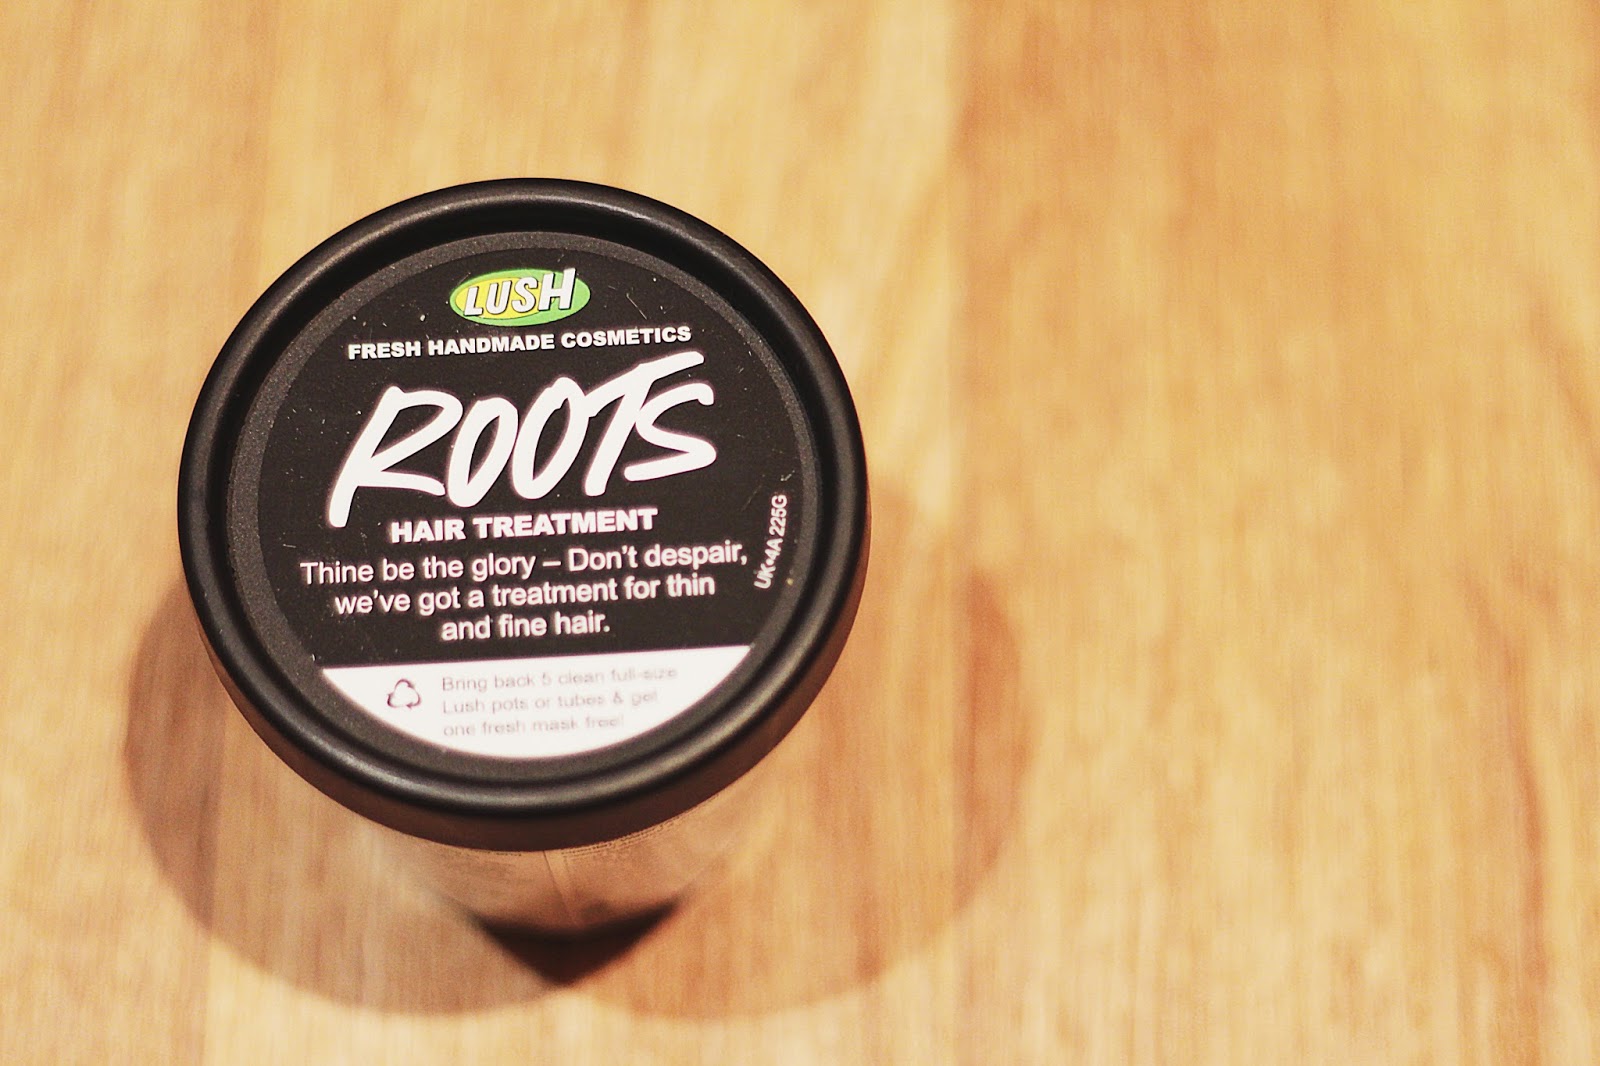 Lush ROOTS scalp treatment product outer